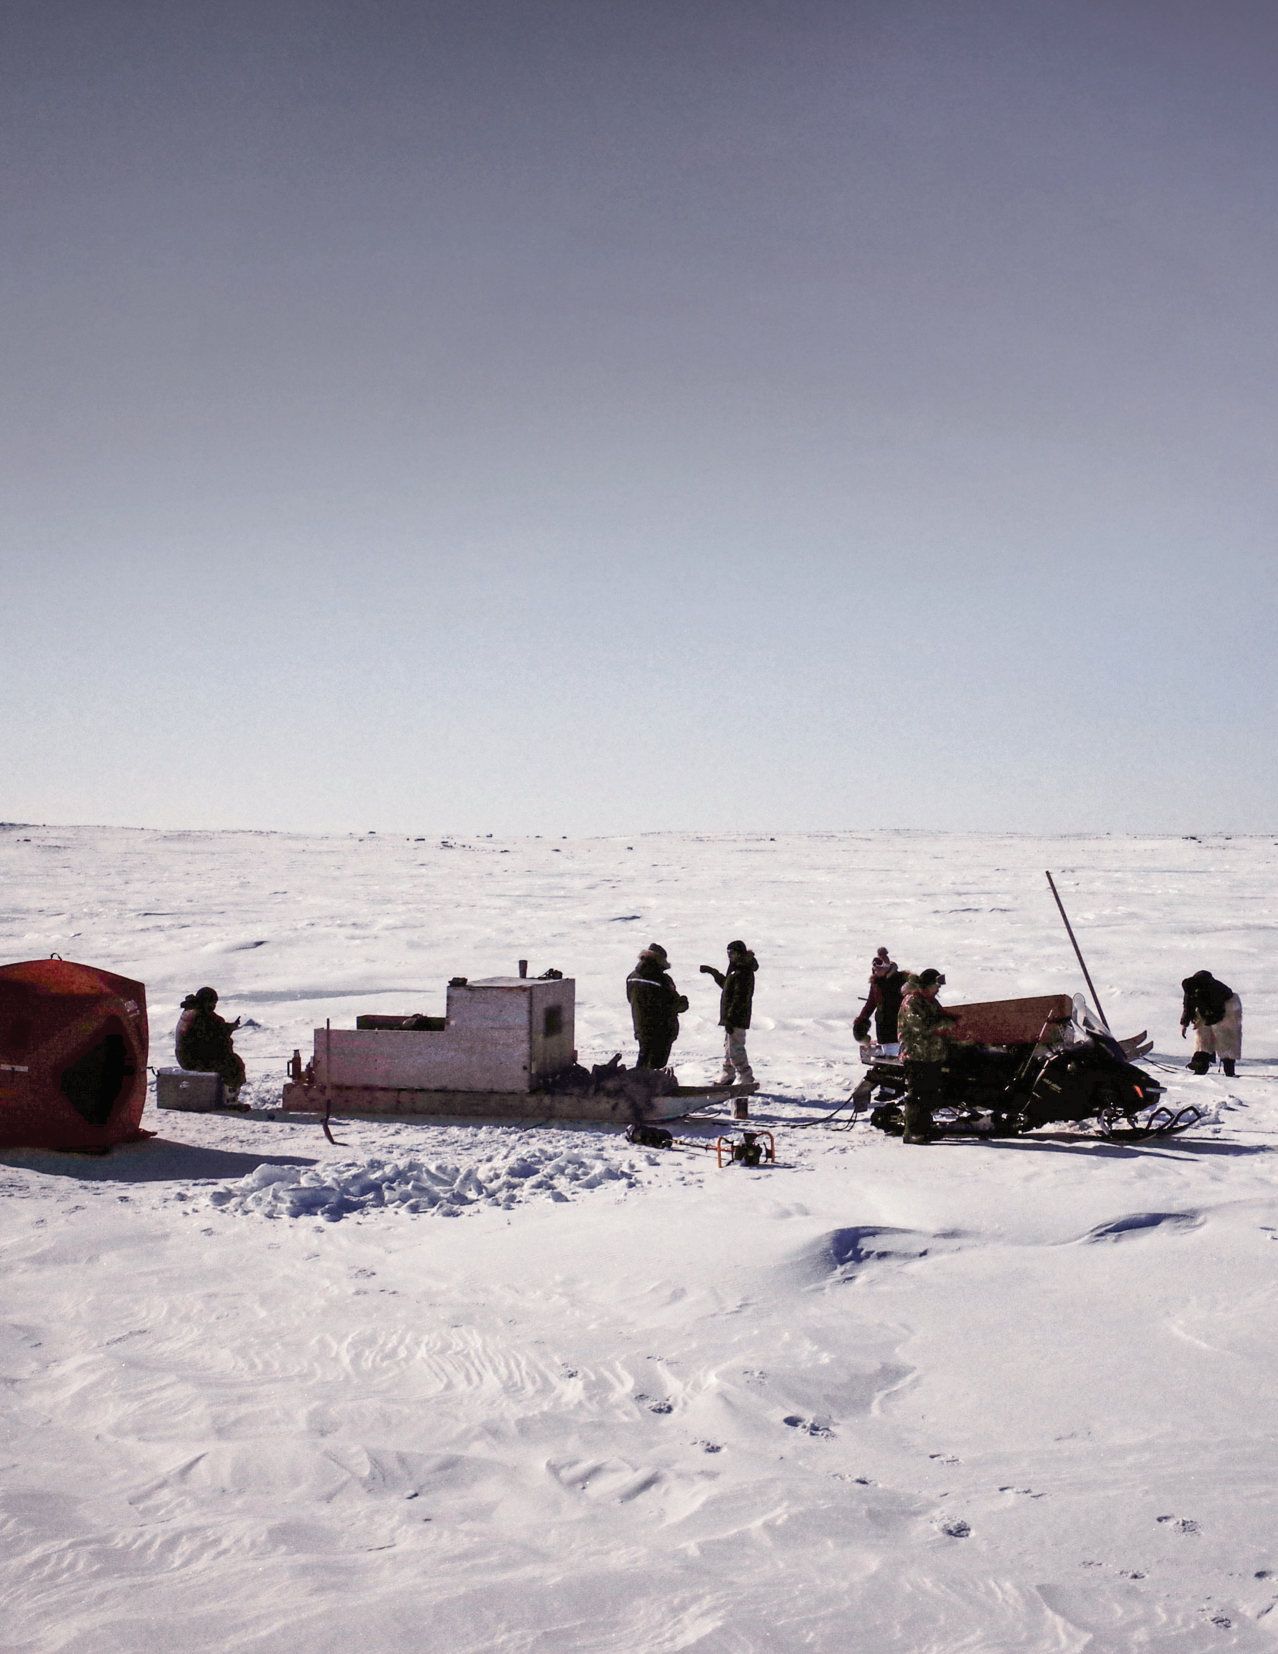 Students, postdoctoral fellows and Stephan Schott working with local hunters and guides in Taloyoak, Nunavut, initiative led by Stephan Schott, Louis Bernatchez, Dylan Fraser and J-S Moore. Photo by Johann Strube, Postdoctoral Fellow in SPPA.